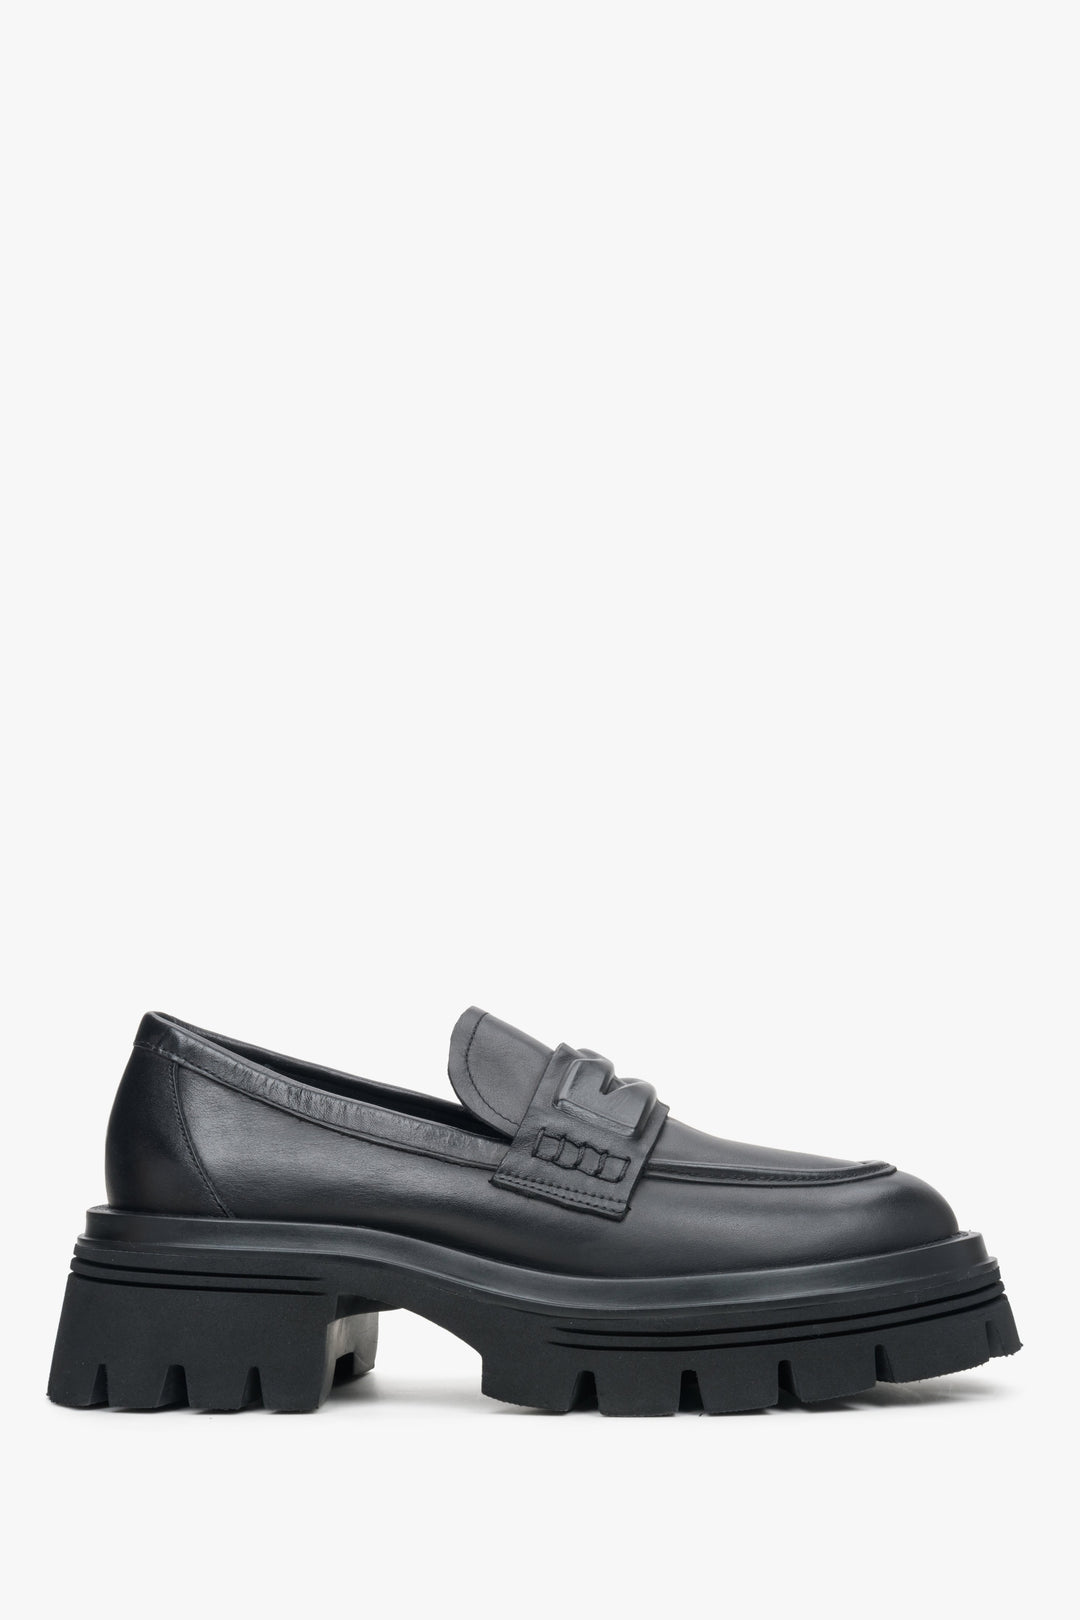 Women's Black Leather Loafers with Thick Sole Estro ER00113783.